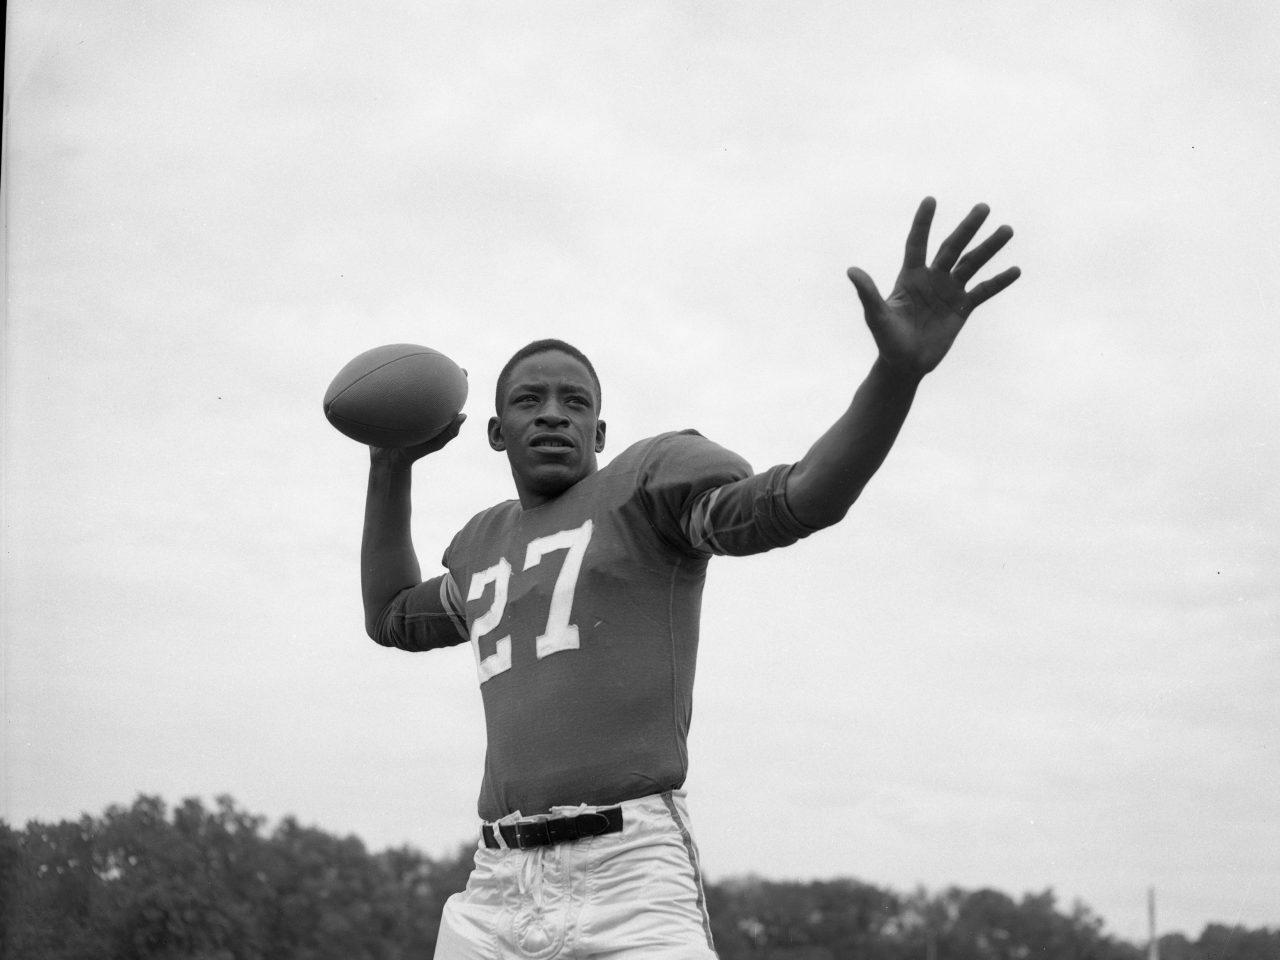 Black and white photo of man throwing a football